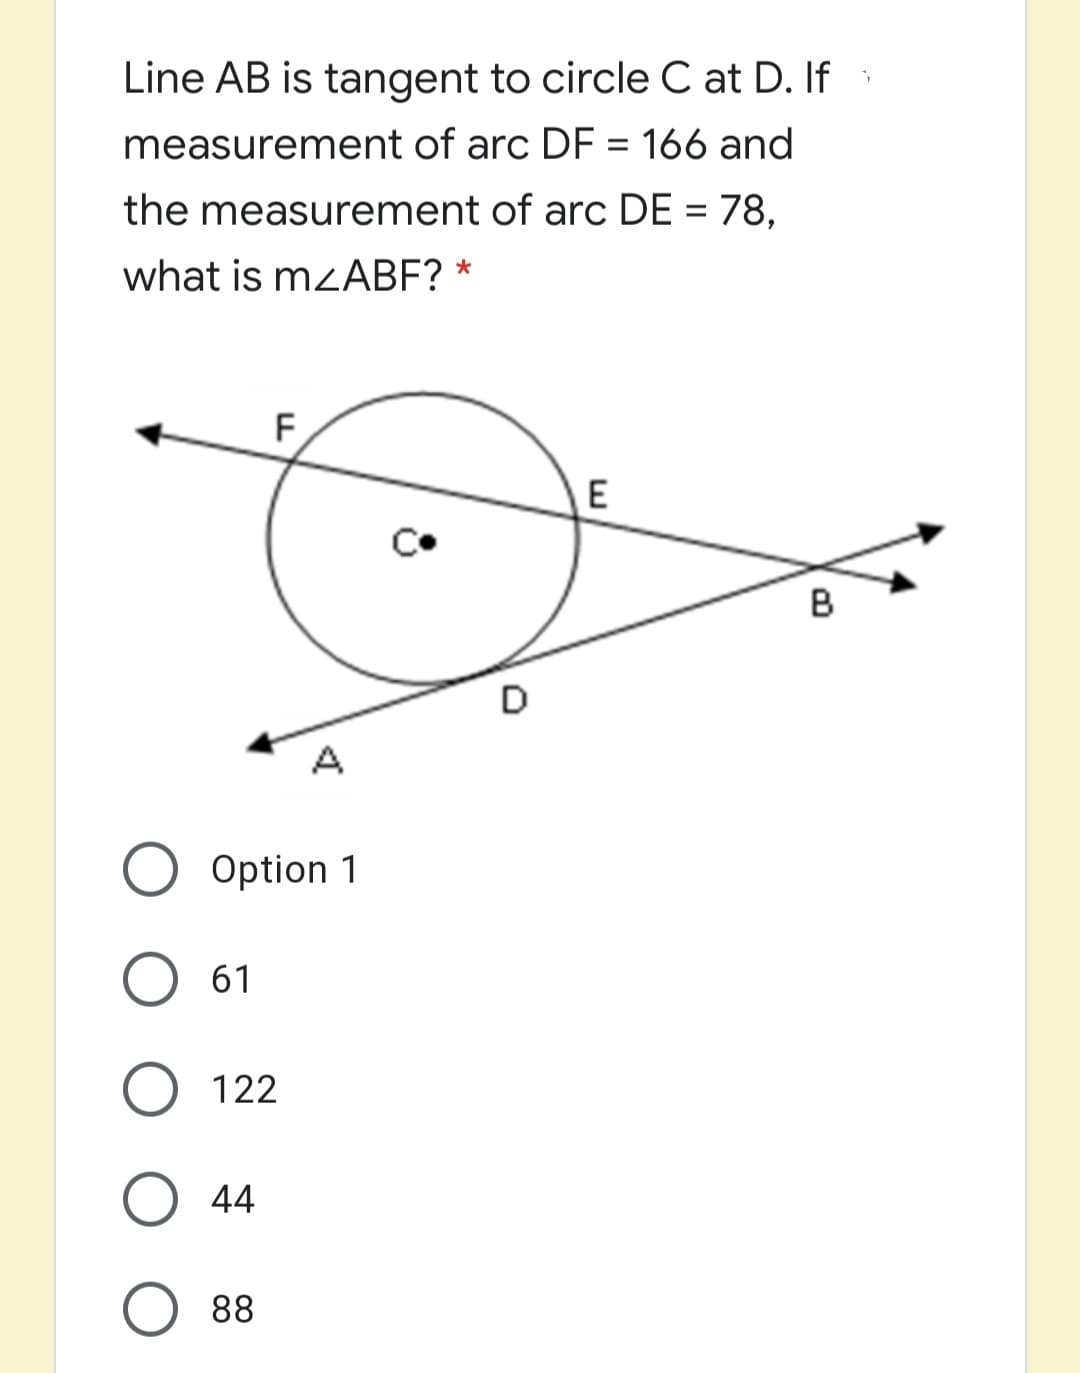 Line AB is tangent to circle C at D. If
measurement of arc DF = 166 and
the measurement of arc DE = 78,
%3D
what is mzABF?
F,
E
в
D
A
Option 1
61
122
44
88
